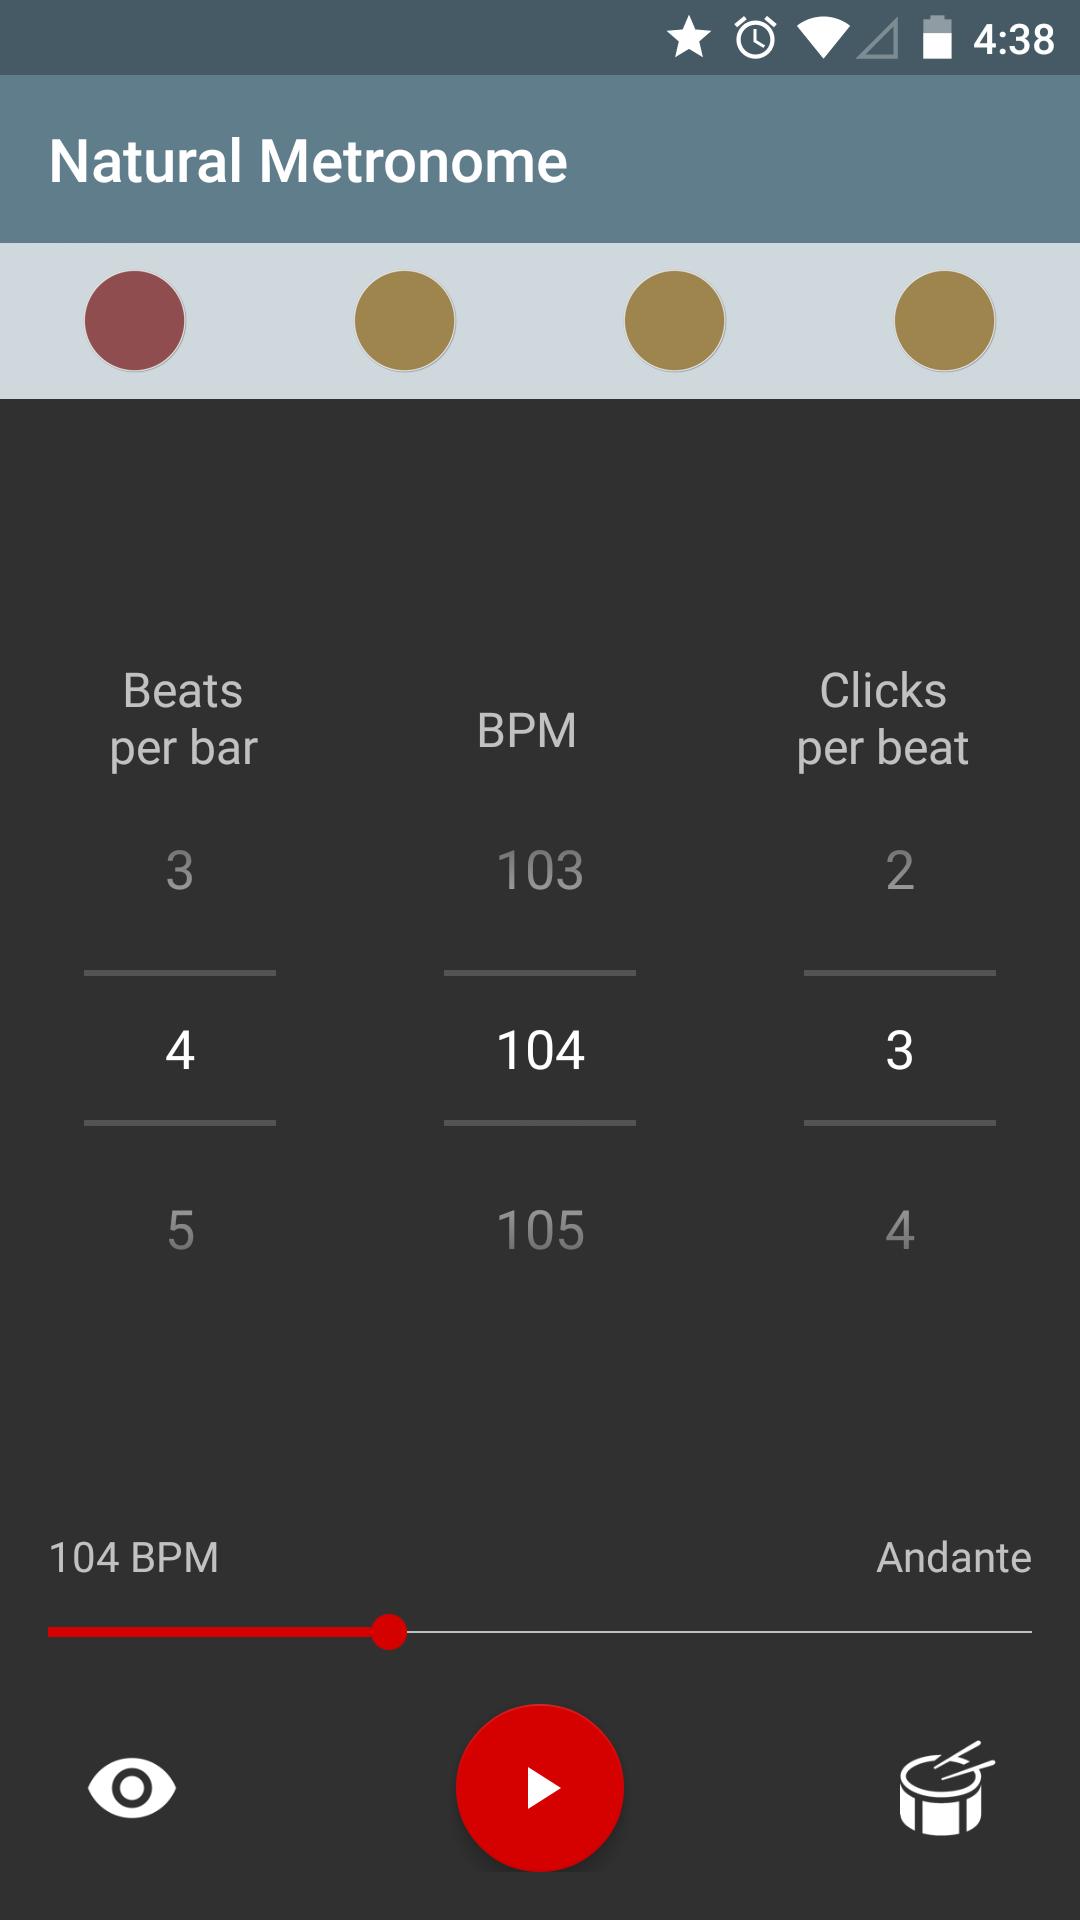 Natural Metronome for Android - APK Download